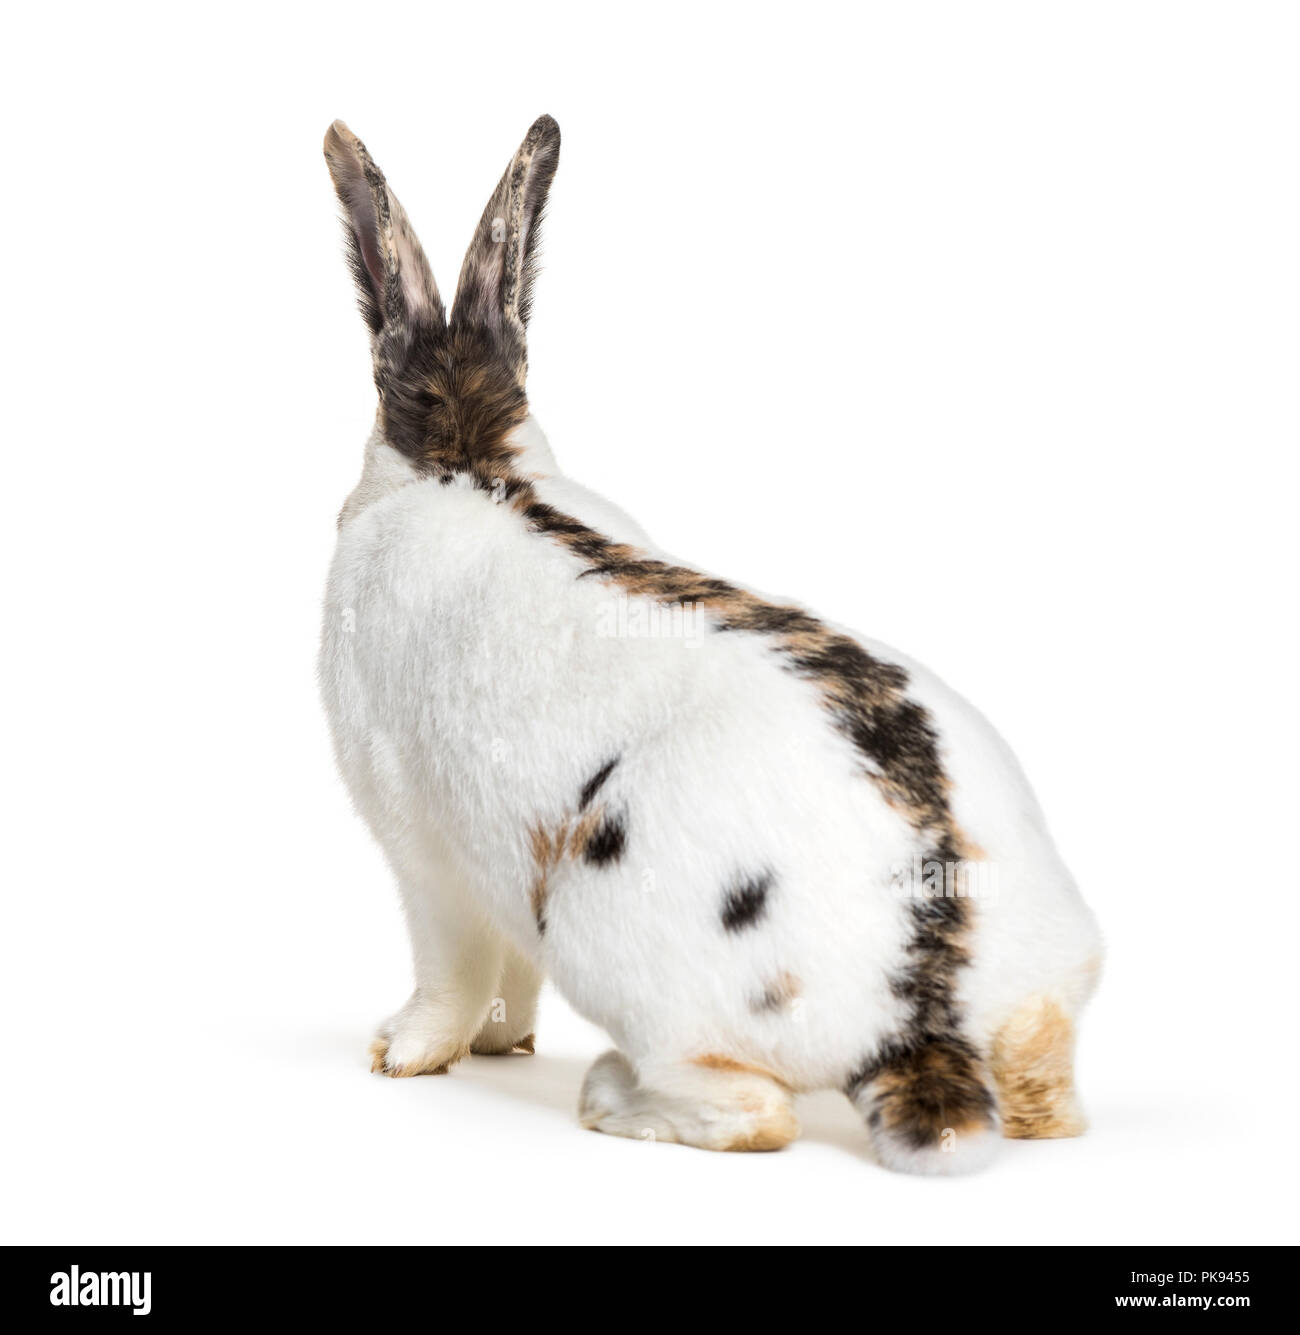 Checkered Giant rabbit is a breed of domestic rabbit that originated in Germany, sitting against white background Stock Photo